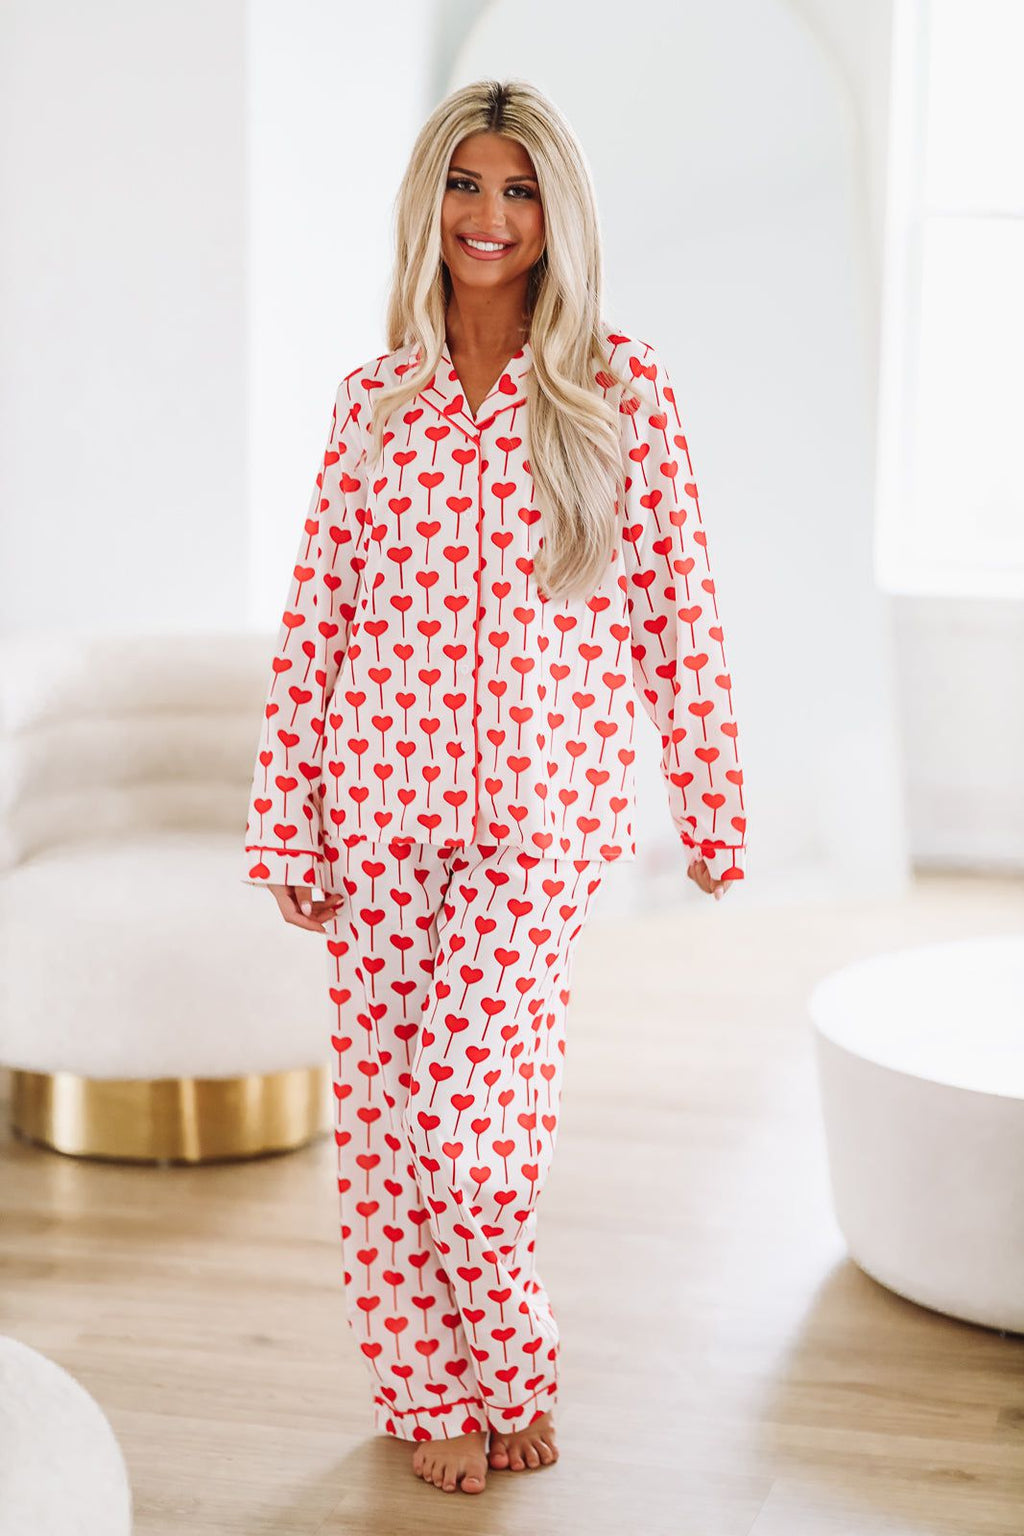 HAZEL & OLIVE Heart Dreams Pajama Top - White and Red